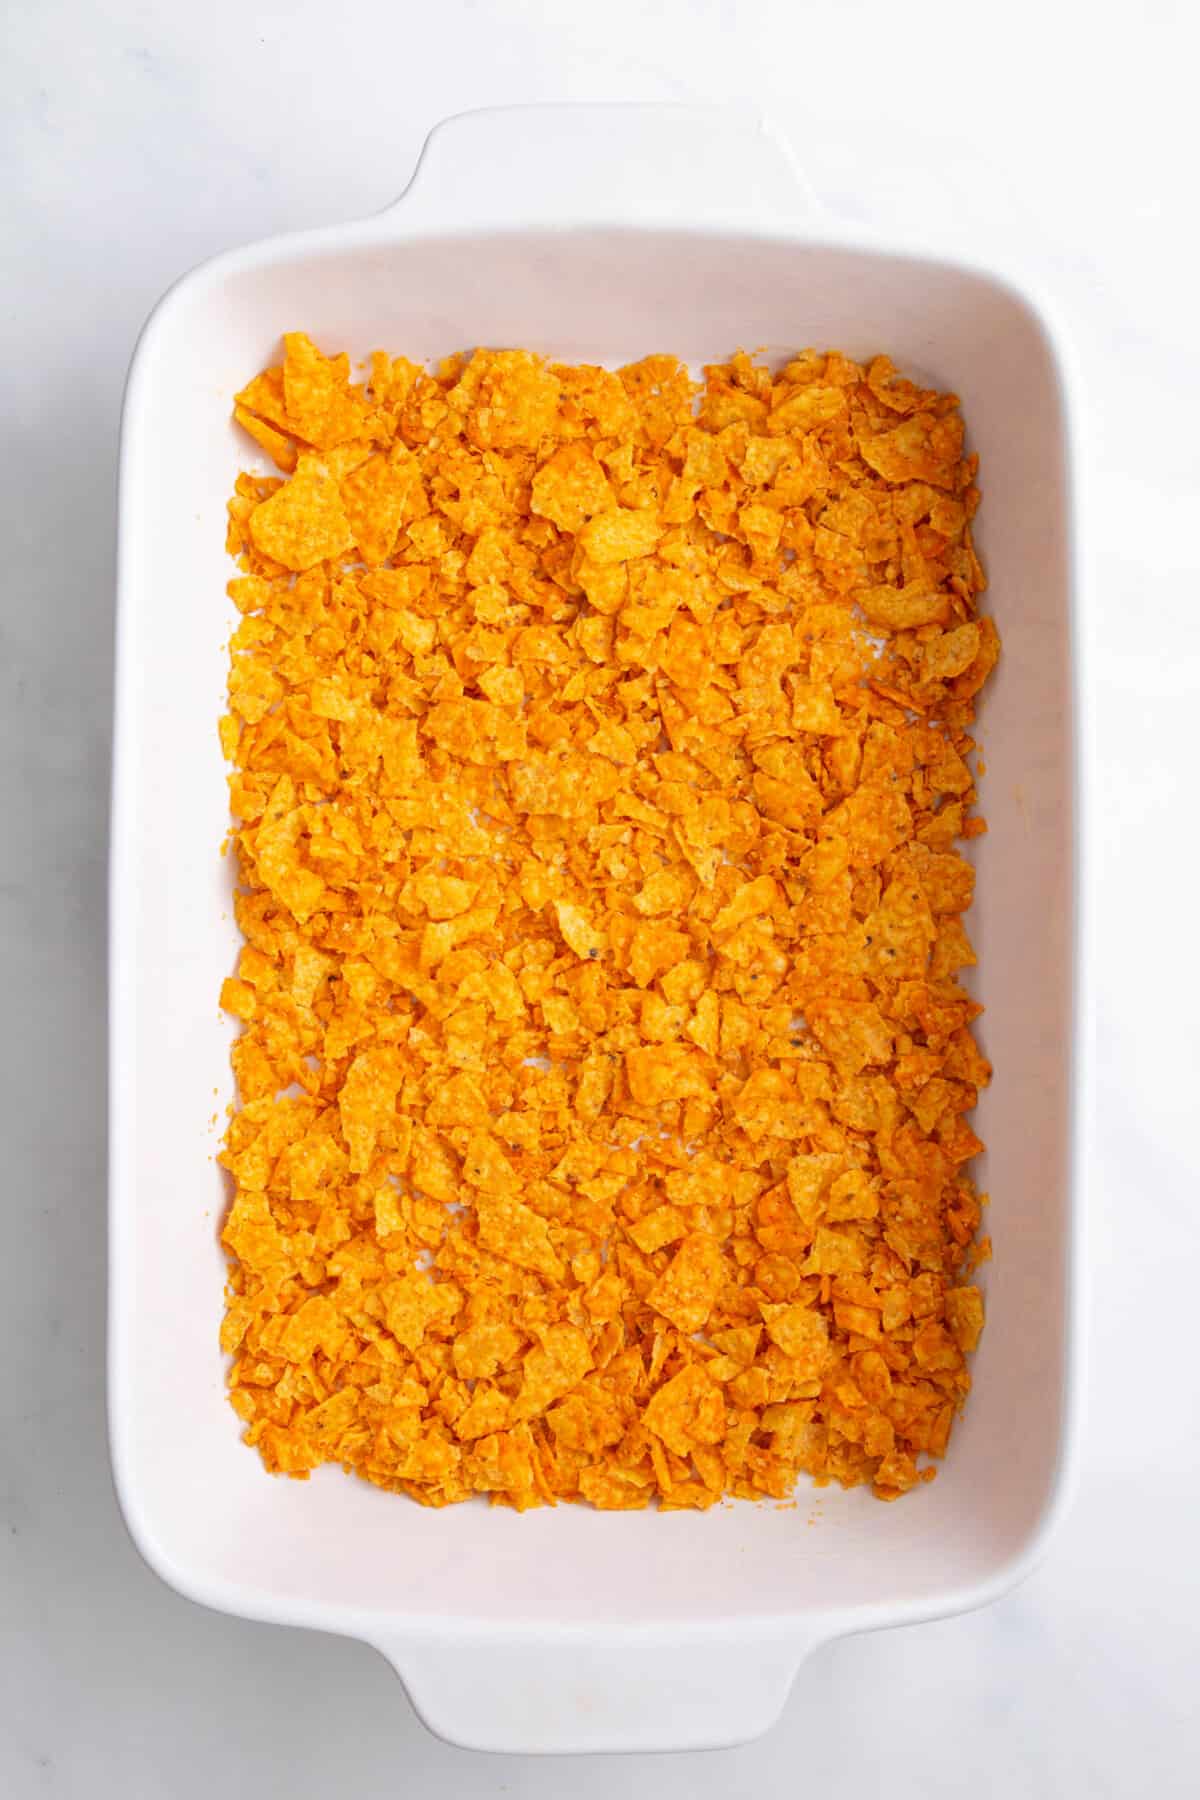 step 1 to make dorito chicken casserole, layer crushed Doritos chips on the bottom of a 9x13 inch casserole dish.